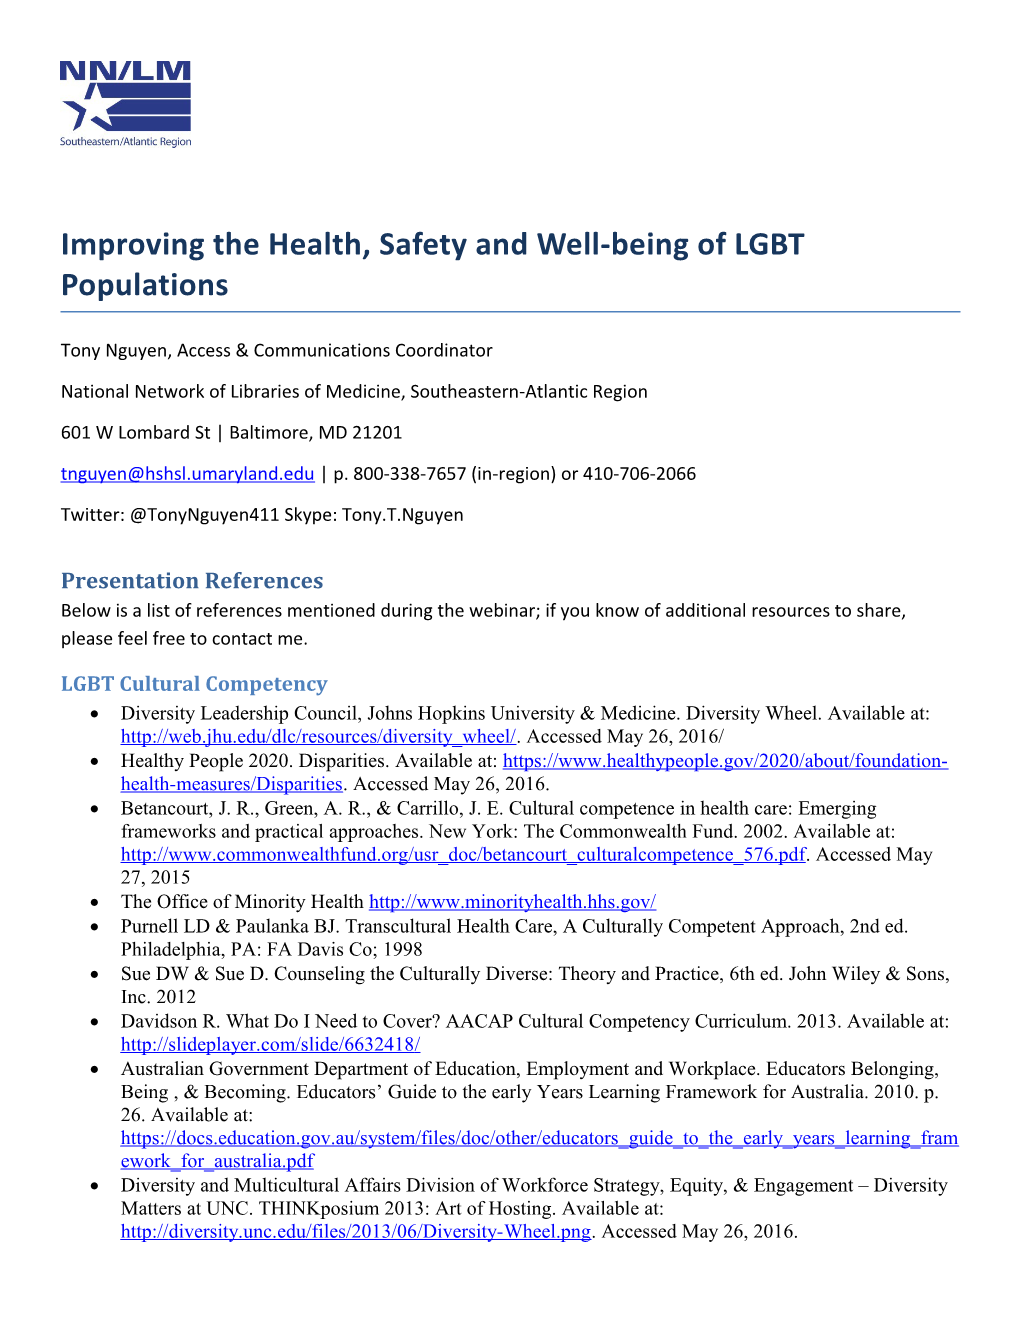 Improving the Health, Safety and Well-Being of LGBT Populations